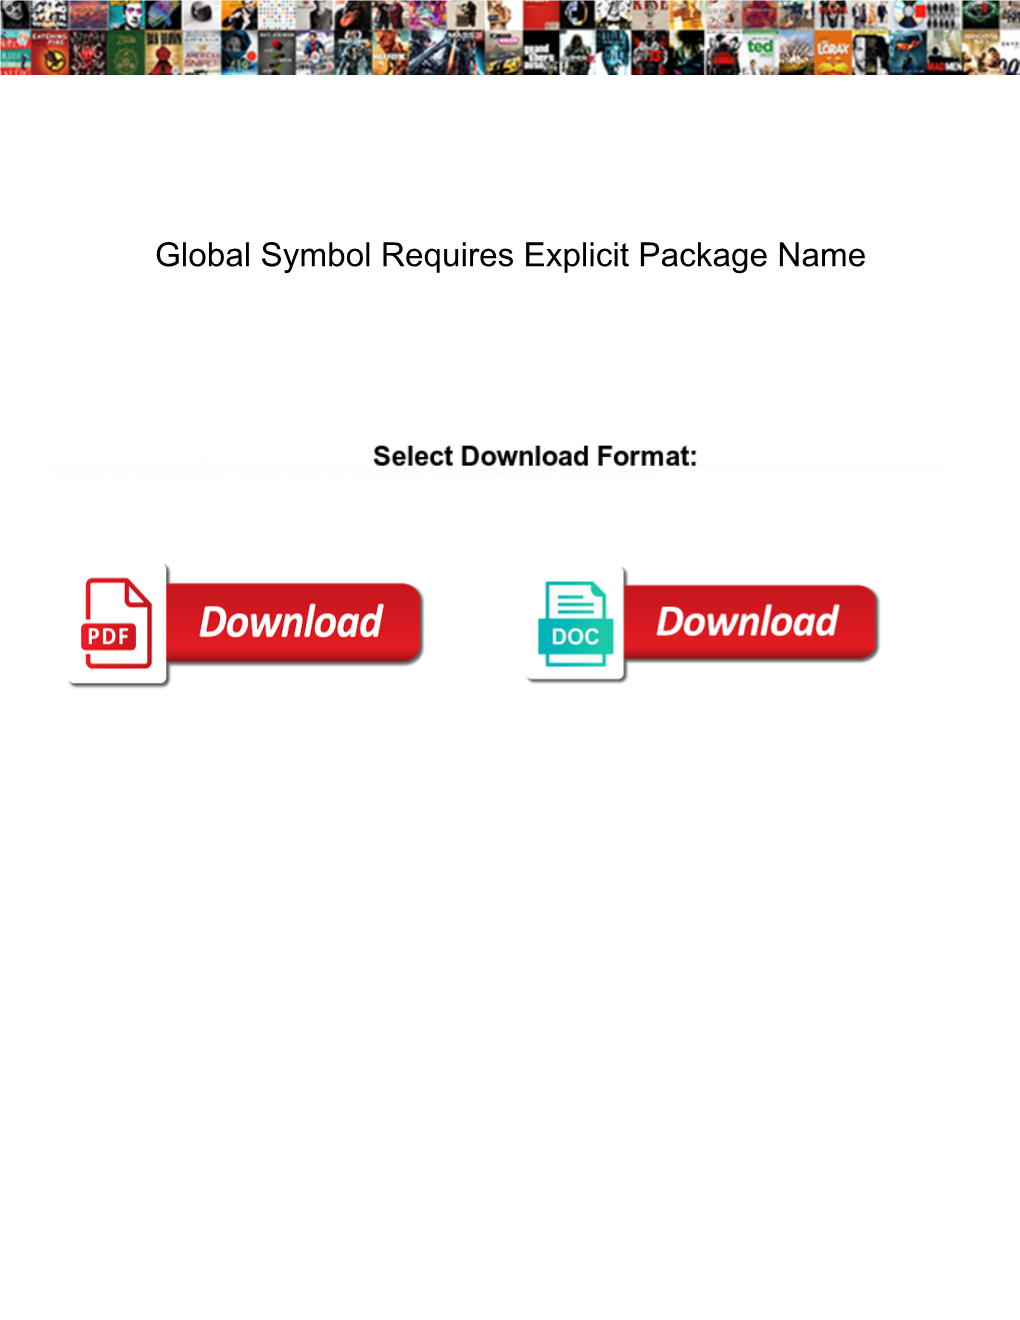 Global Symbol Requires Explicit Package Name